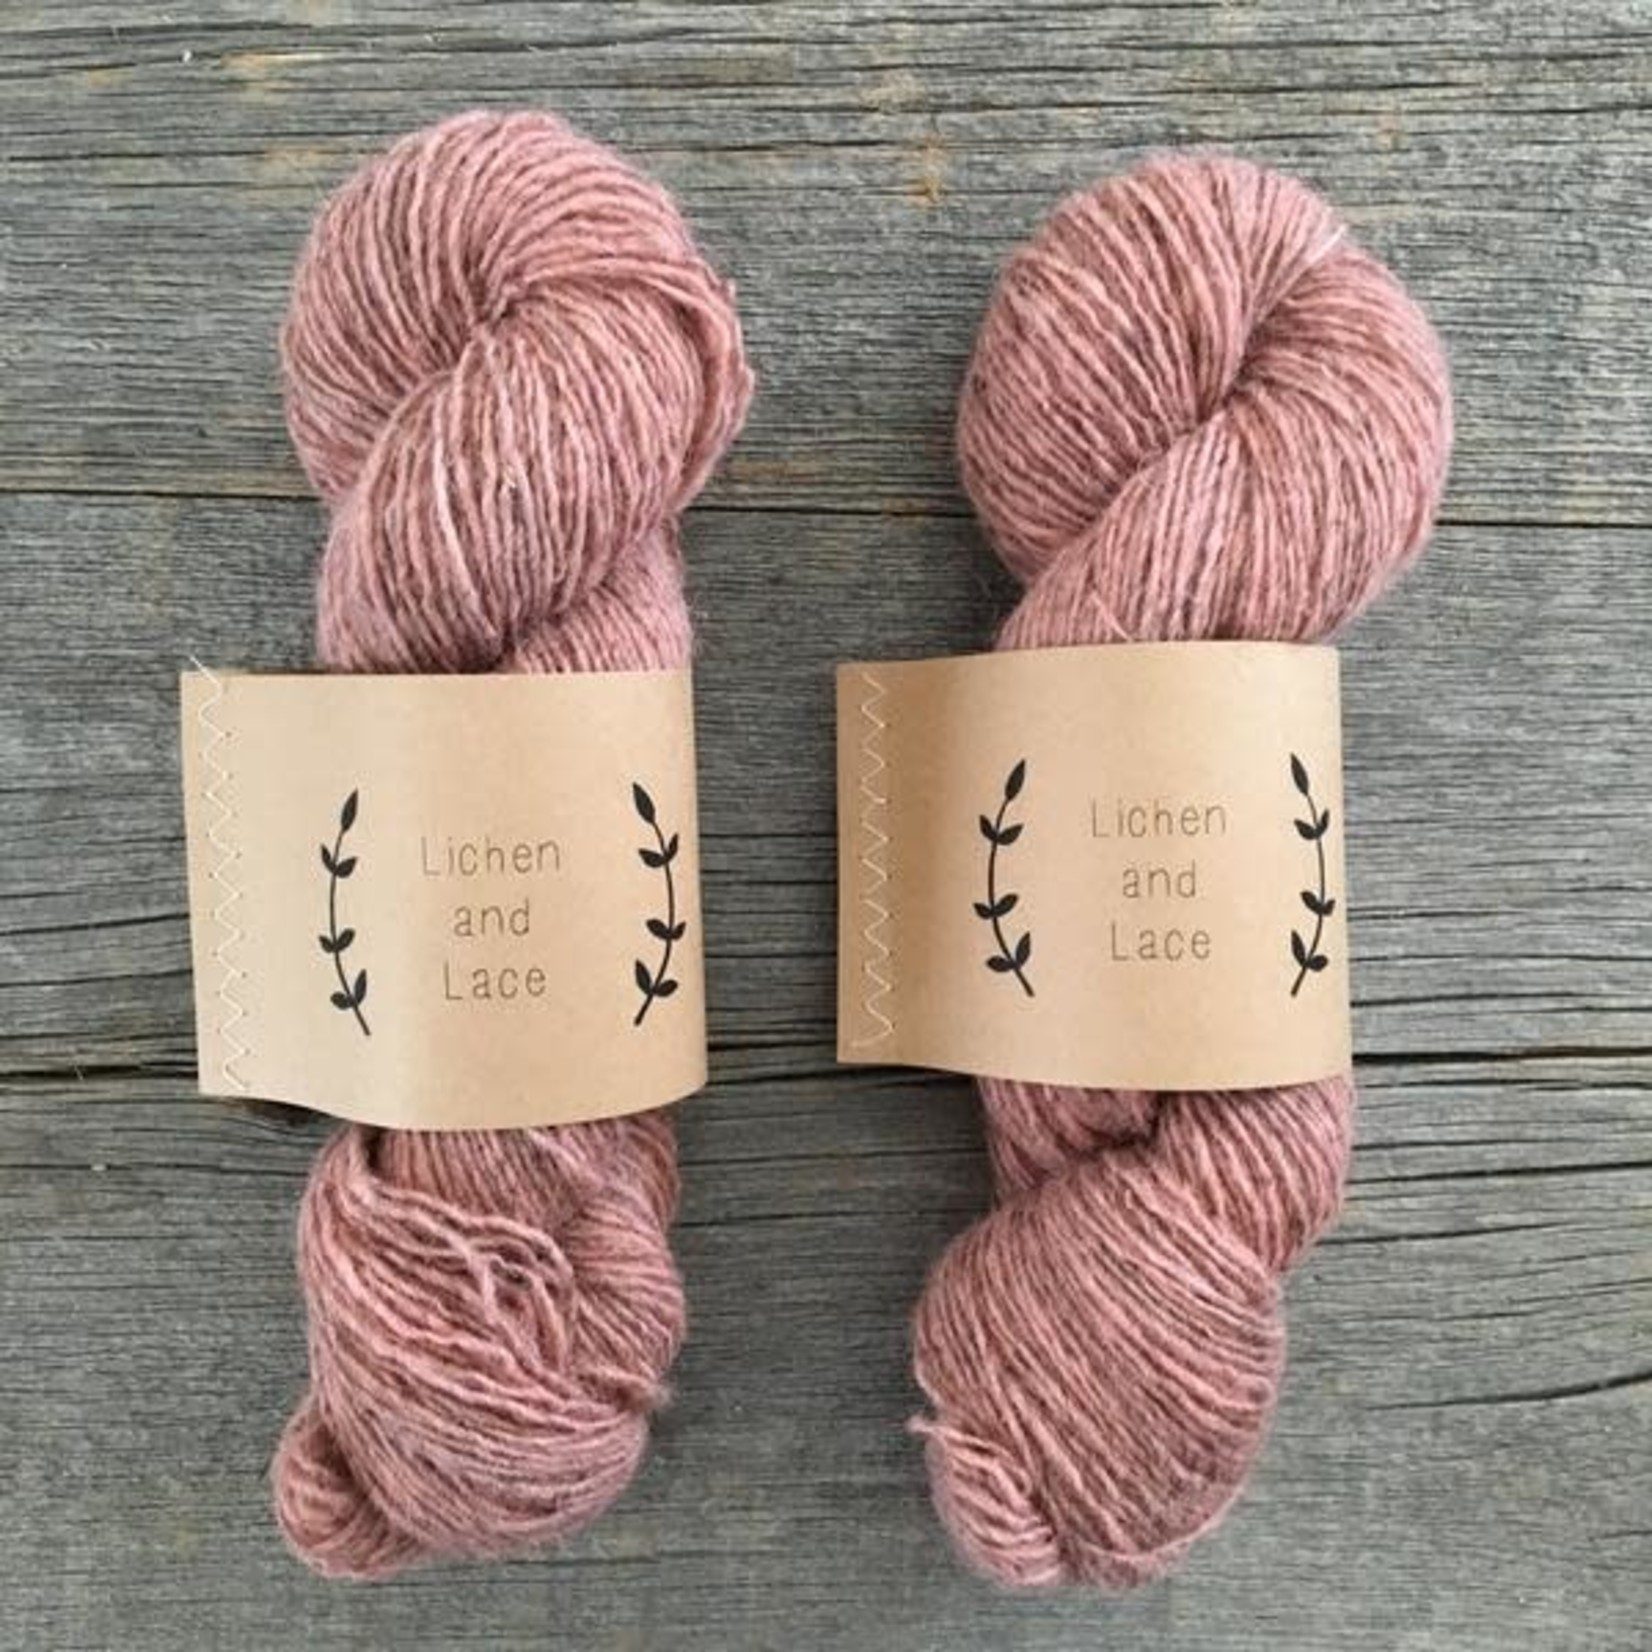 Lichen and Lace LL Rustic Heather Sport - Rose